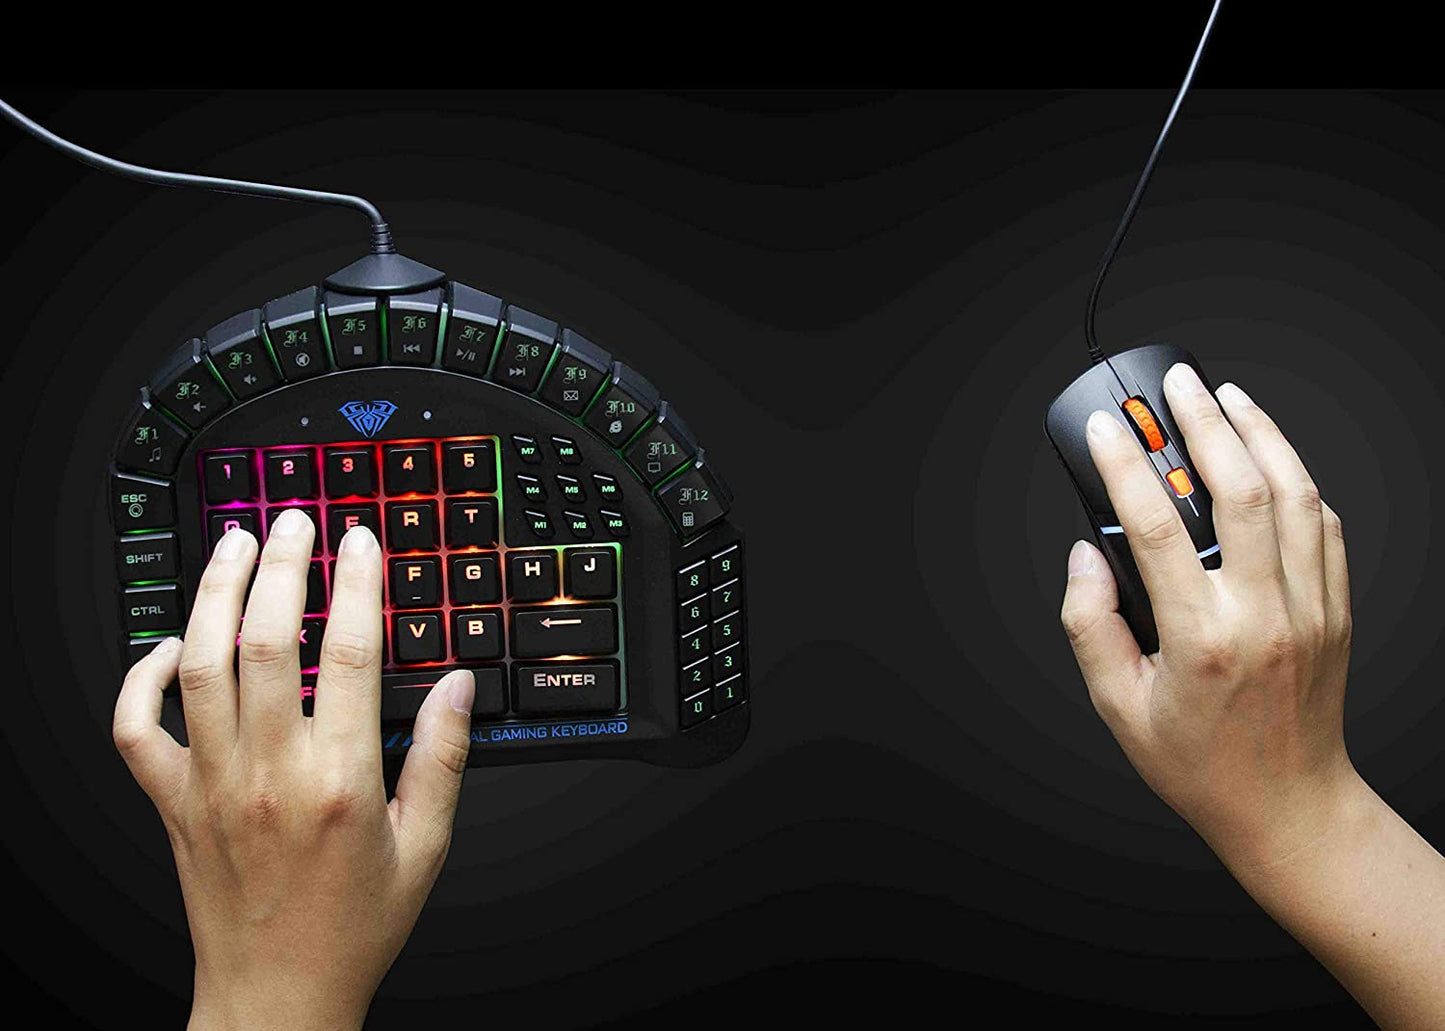 Ergonomic One-Handed Mechanical Gaming Keyboard with Blue Switches, Customizable RGB Backlit Effects, Programmable Macro Keys, and Detachable Wrist Rest